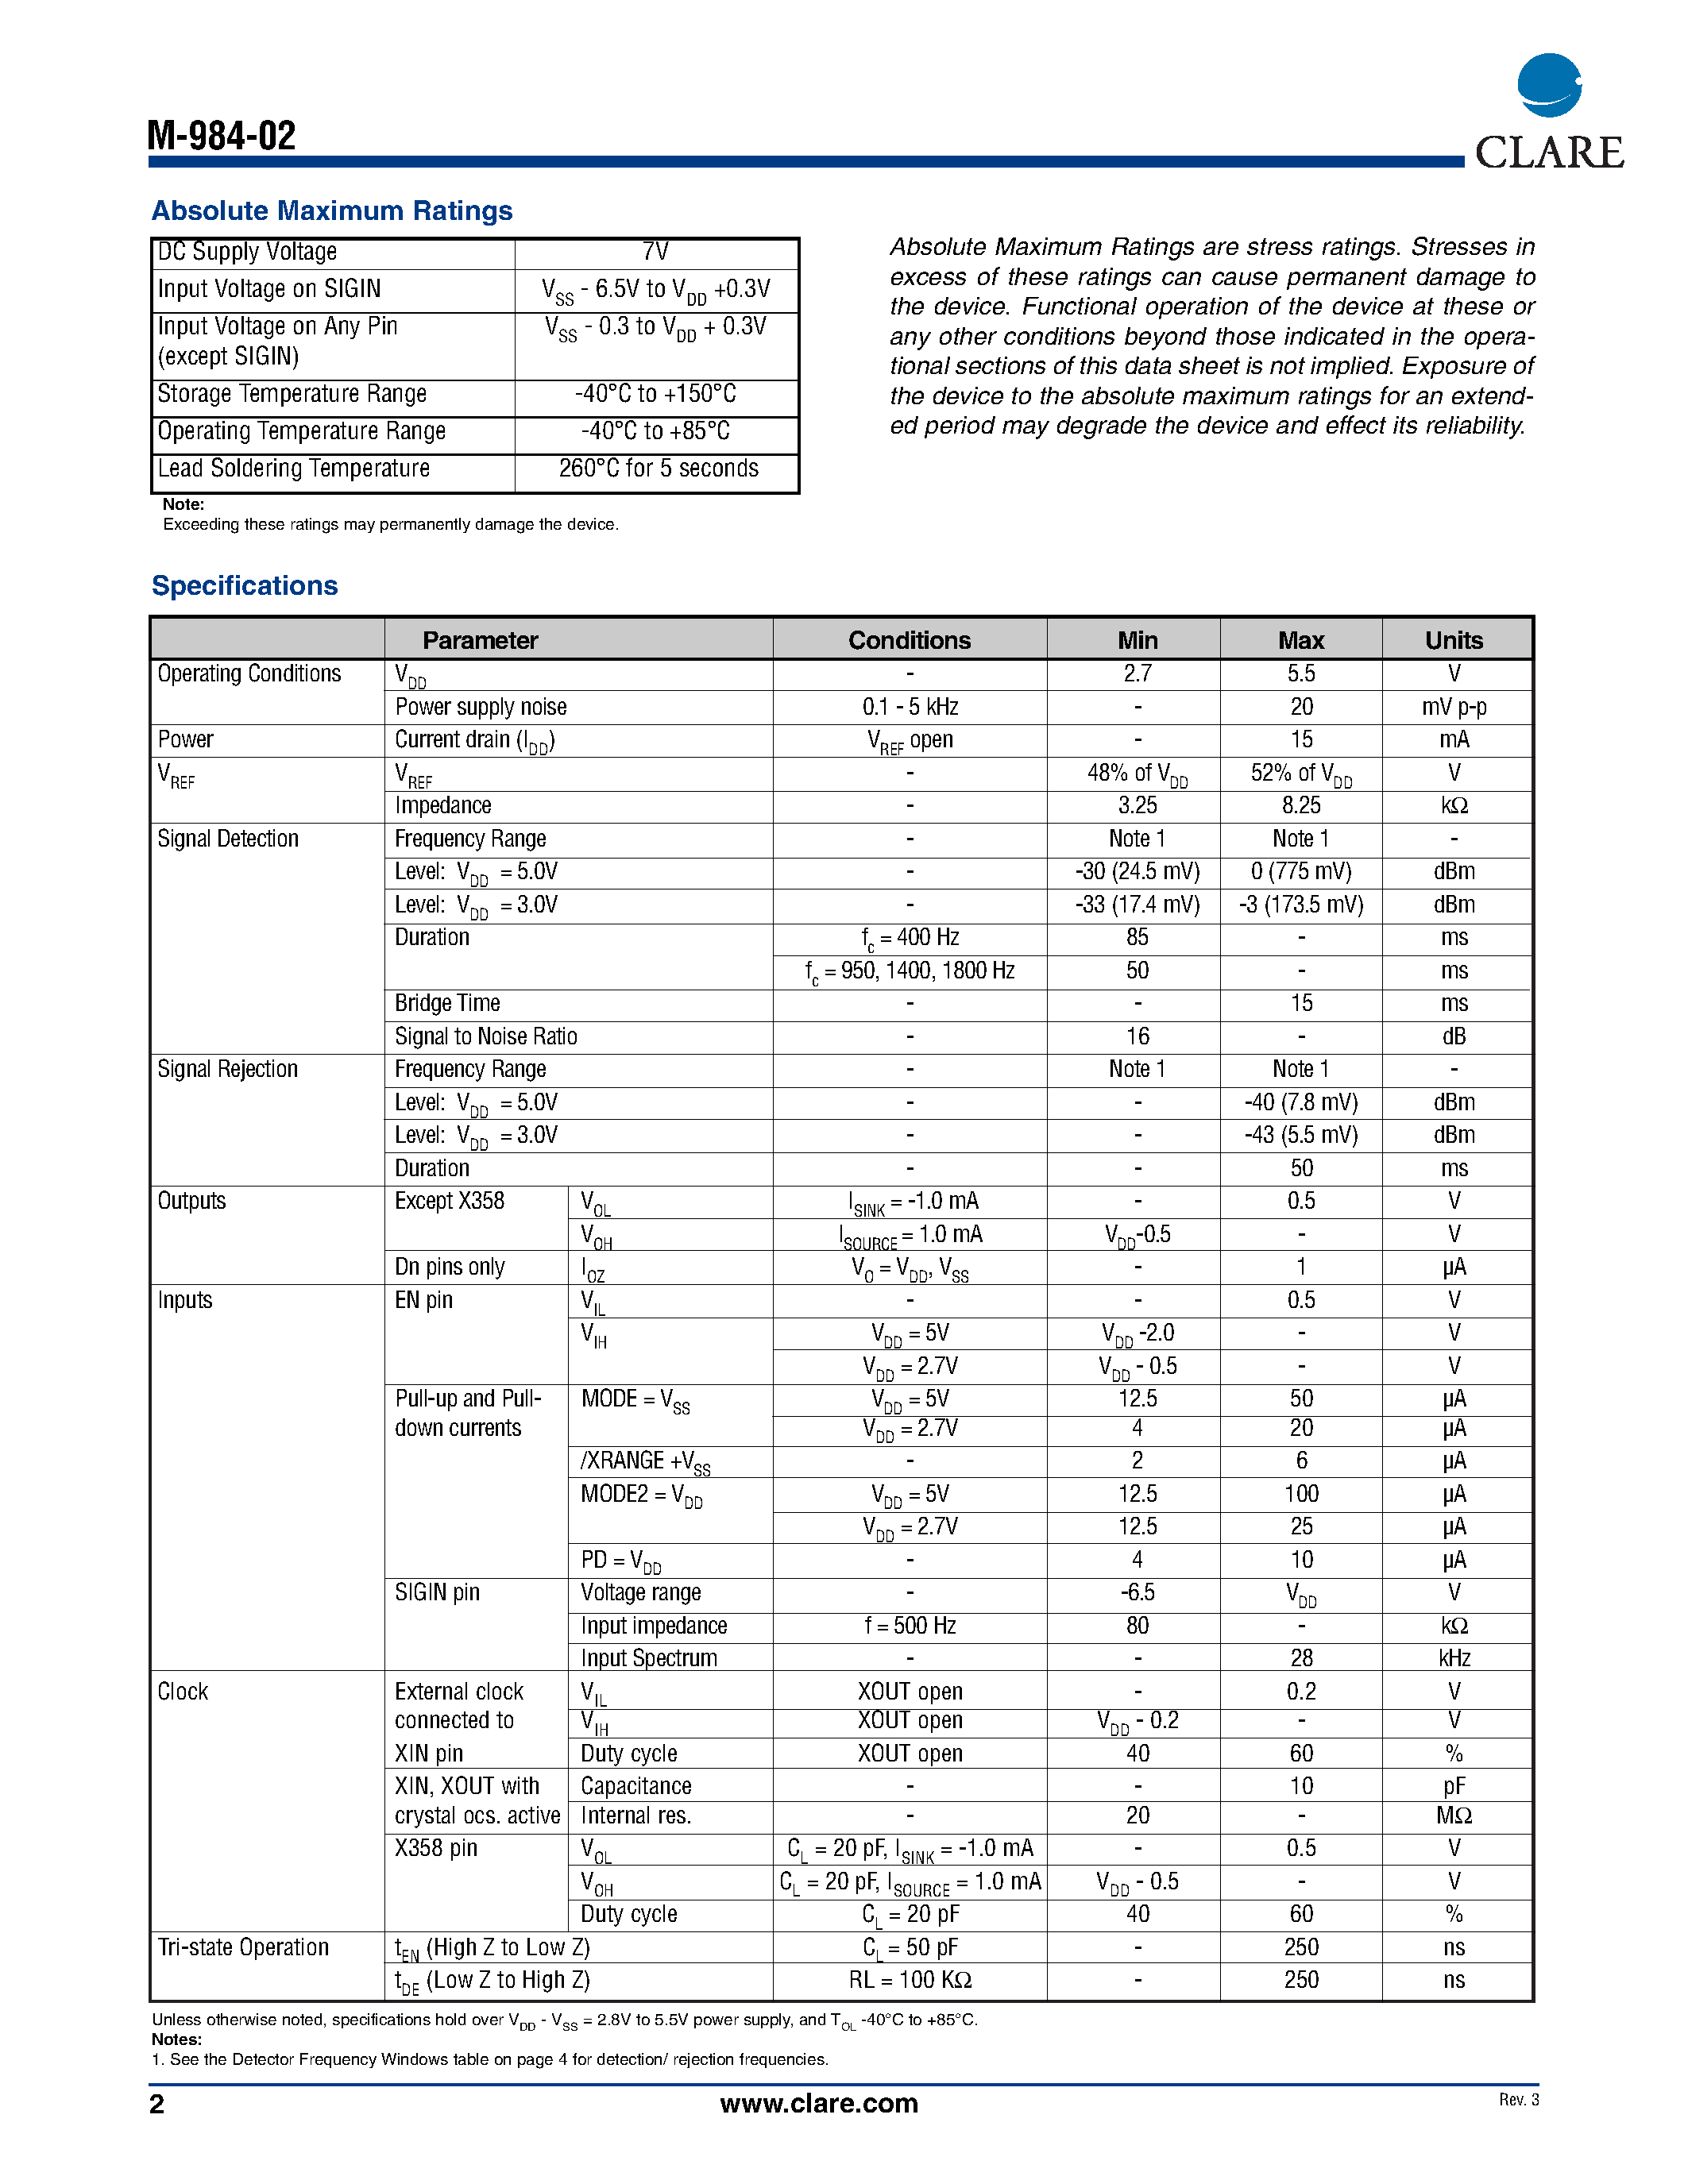 Datasheet M-984-02S - Special Information Tone Detector page 2